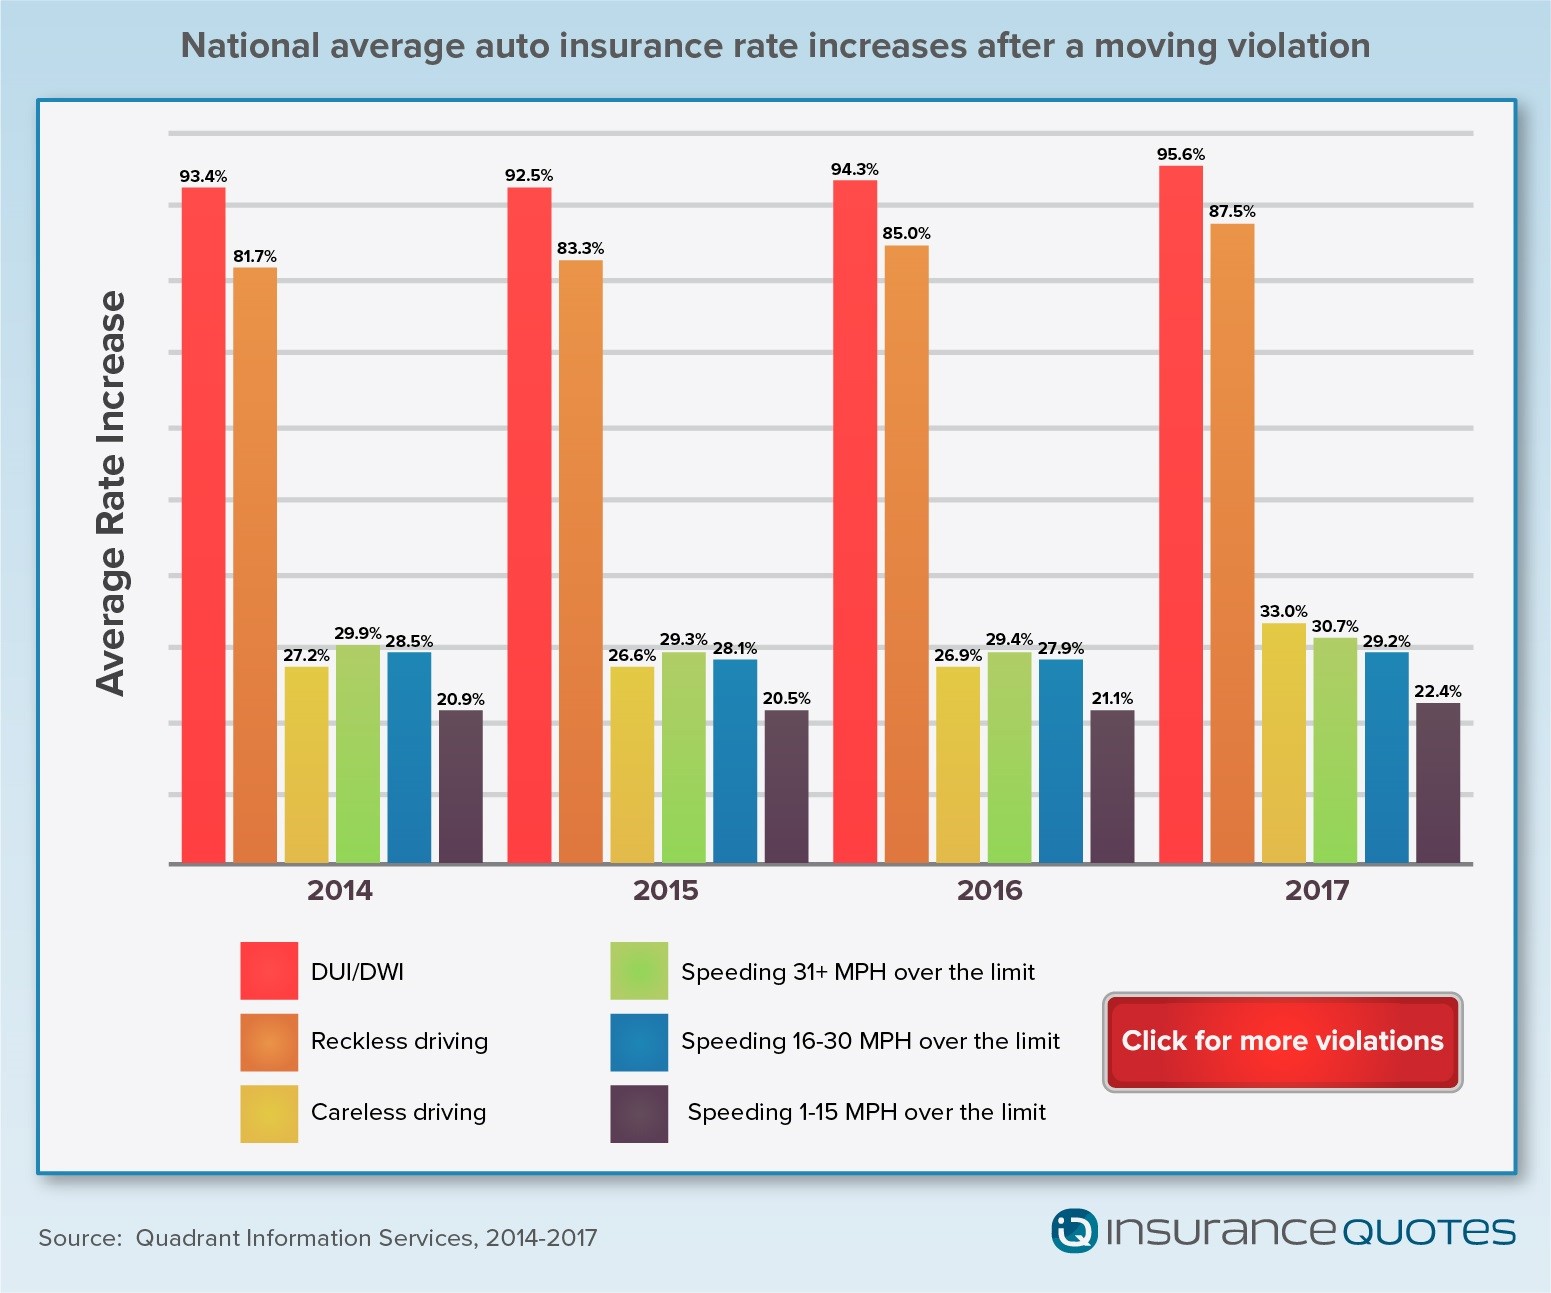 National average auto insurance rate increases after a moving violation